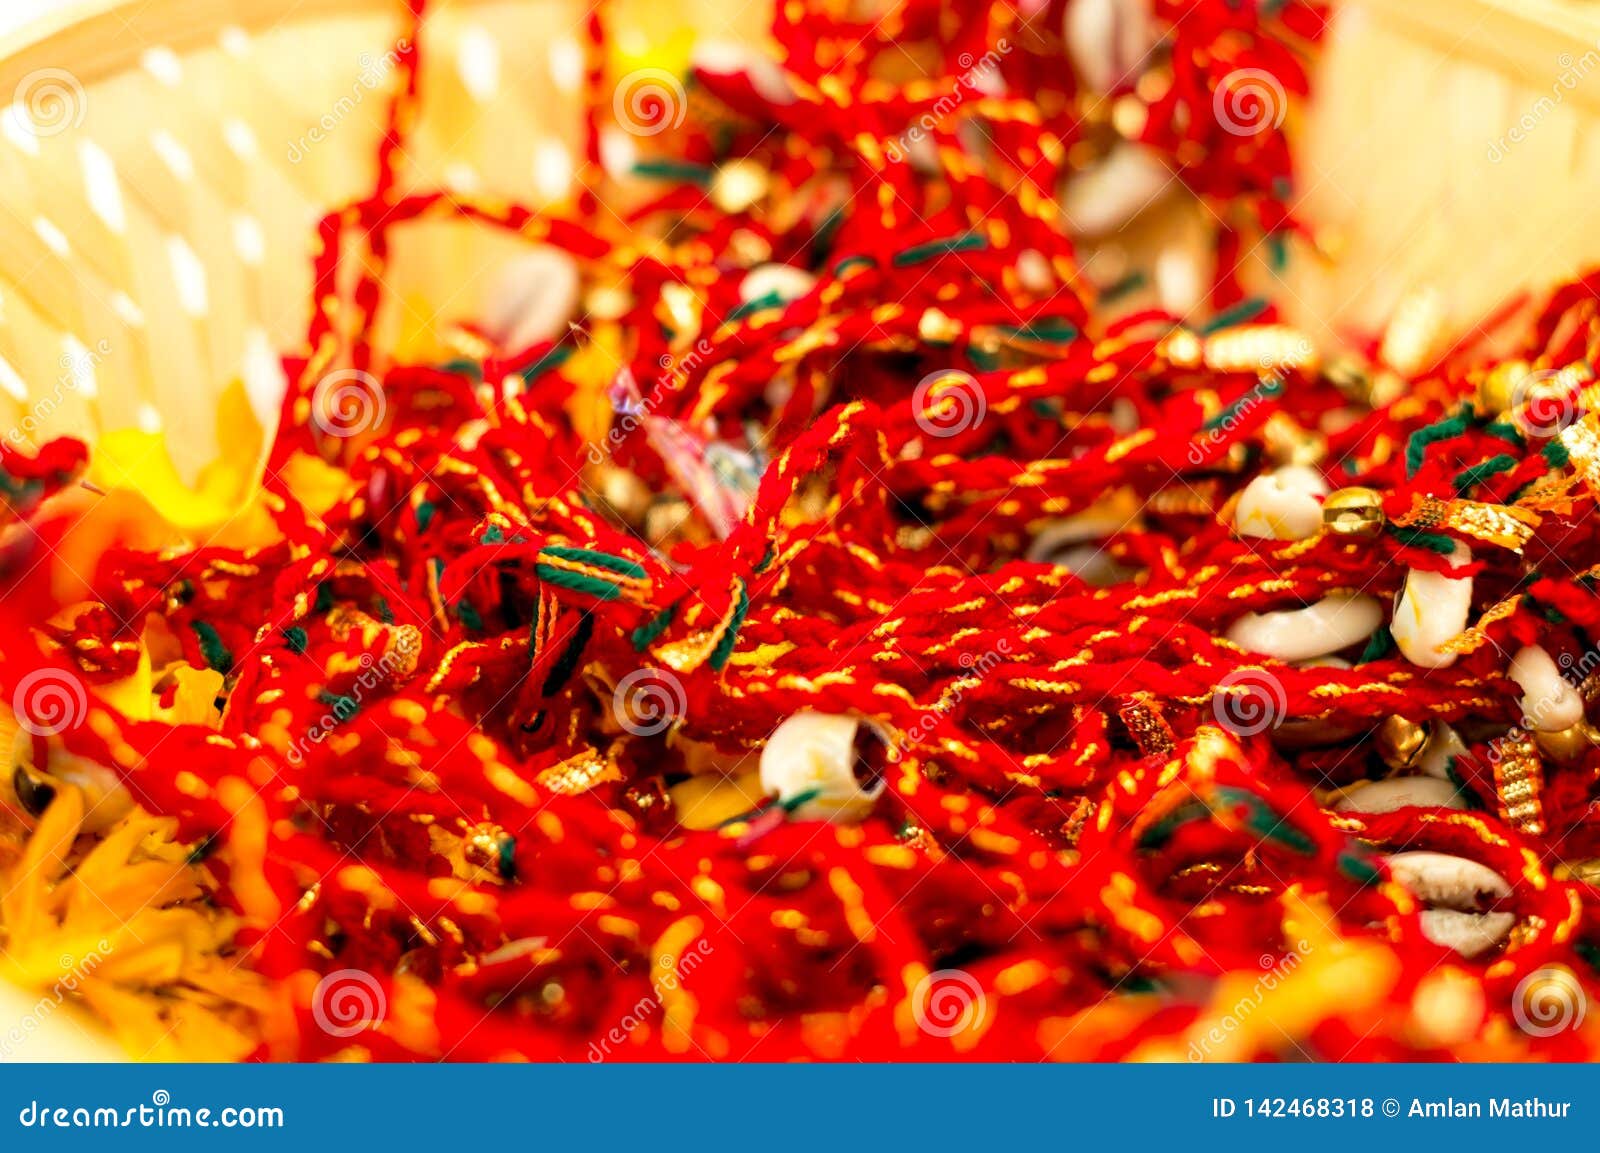 Red Yellow Sacred Hindu Threads To Be Tied on the Wrist for Protection  Stock Photo - Image of hindu, hinduism: 142468318